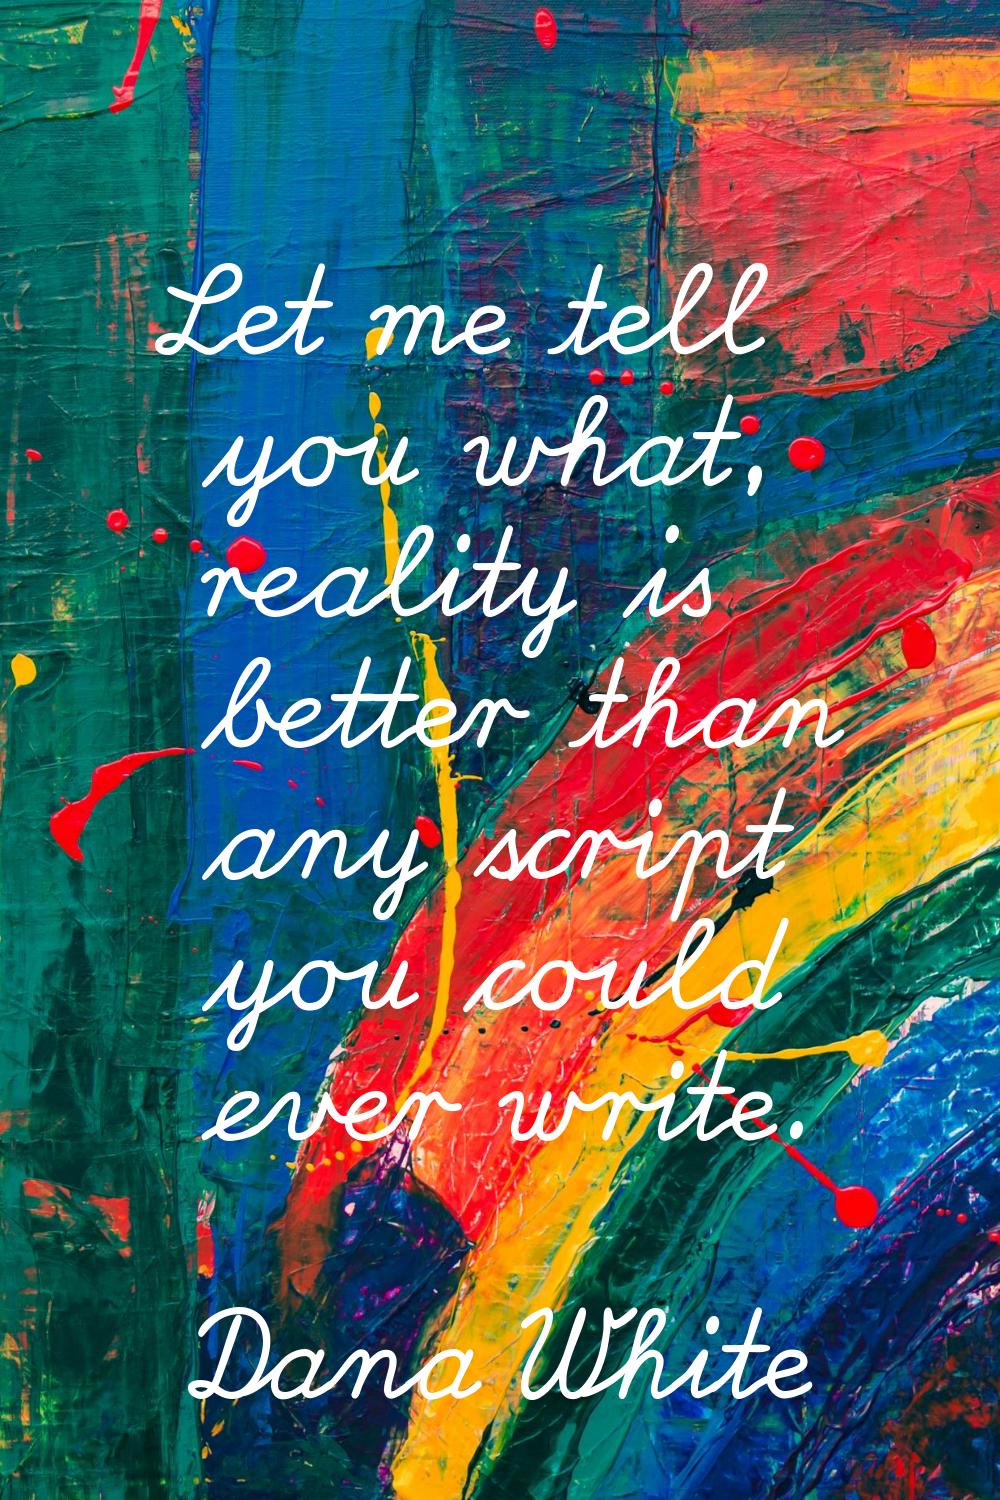 Let me tell you what, reality is better than any script you could ever write.